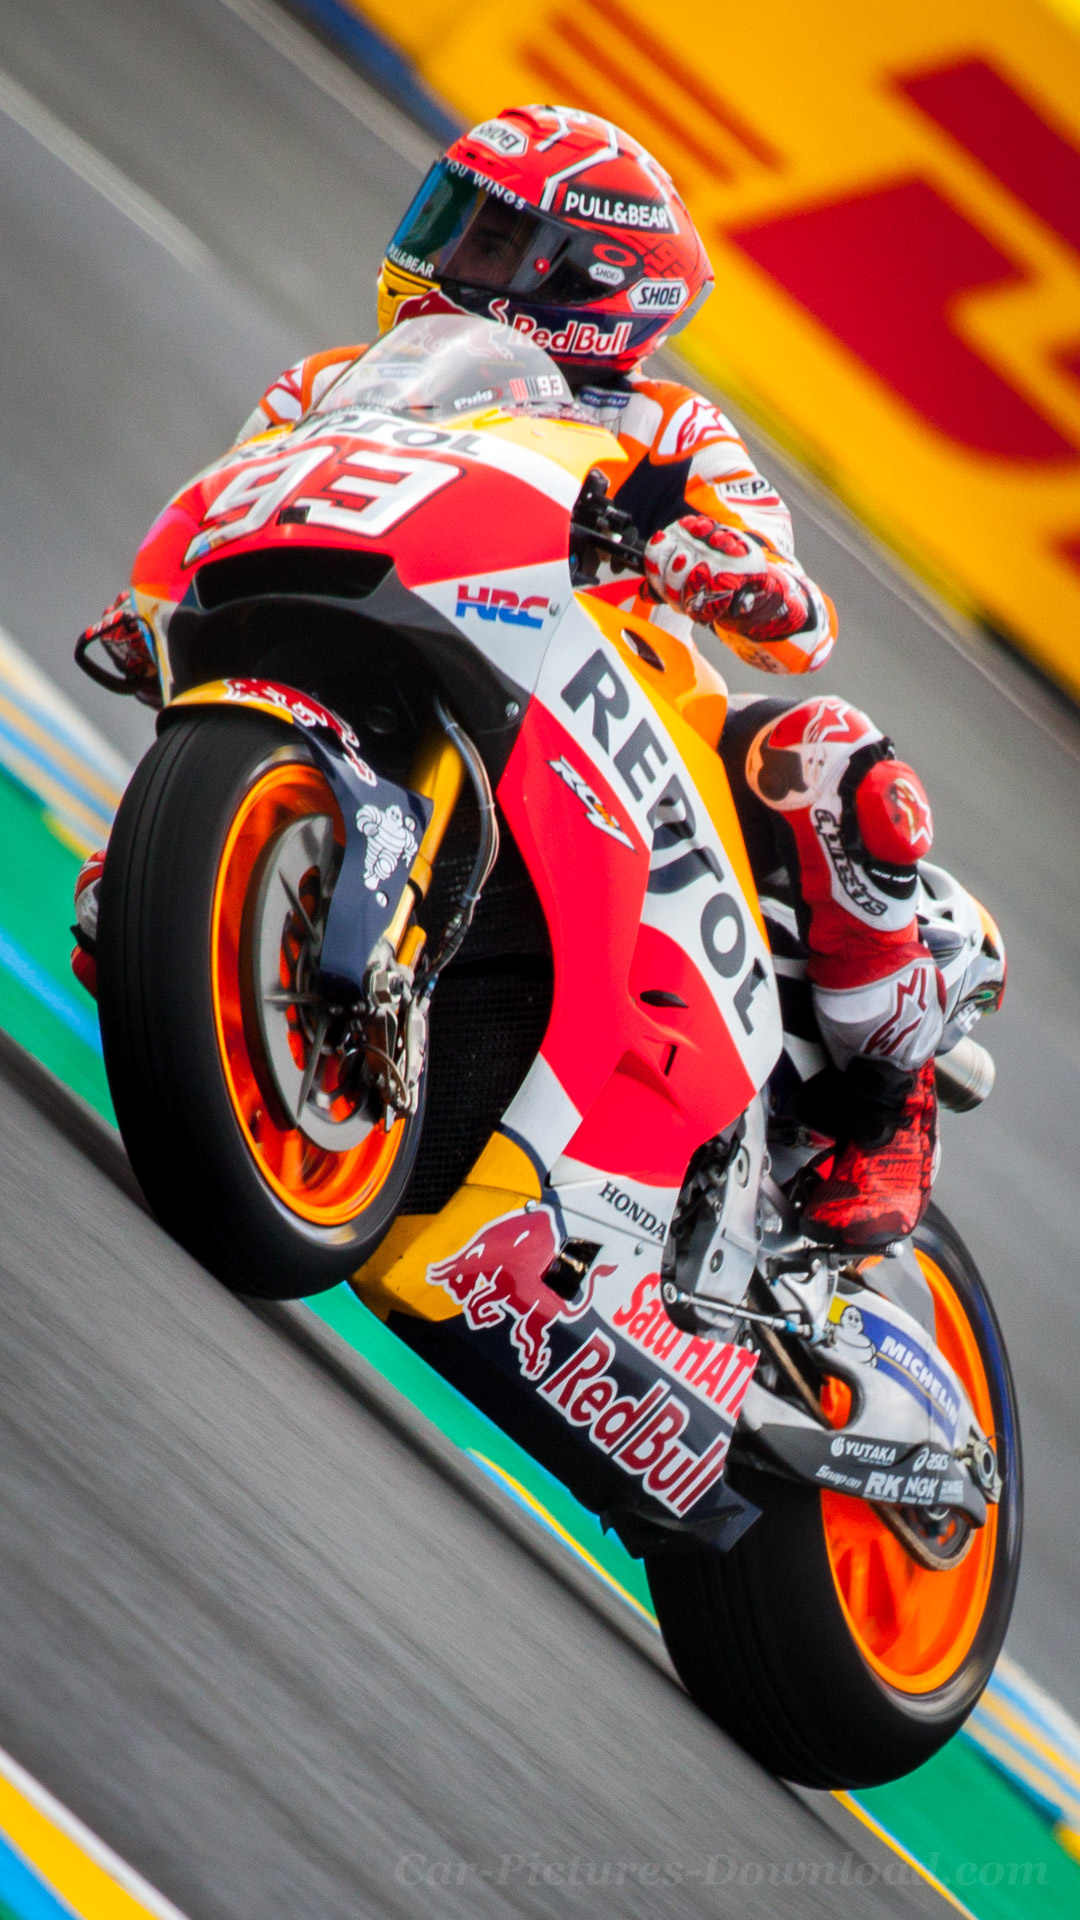 Motorcycle Racing: Marc Marquez, Spanish Professional Grand Prix Motorcycle Road Racer, Honda's Factory Team, Since 2013. 1080x1920 Full HD Wallpaper.